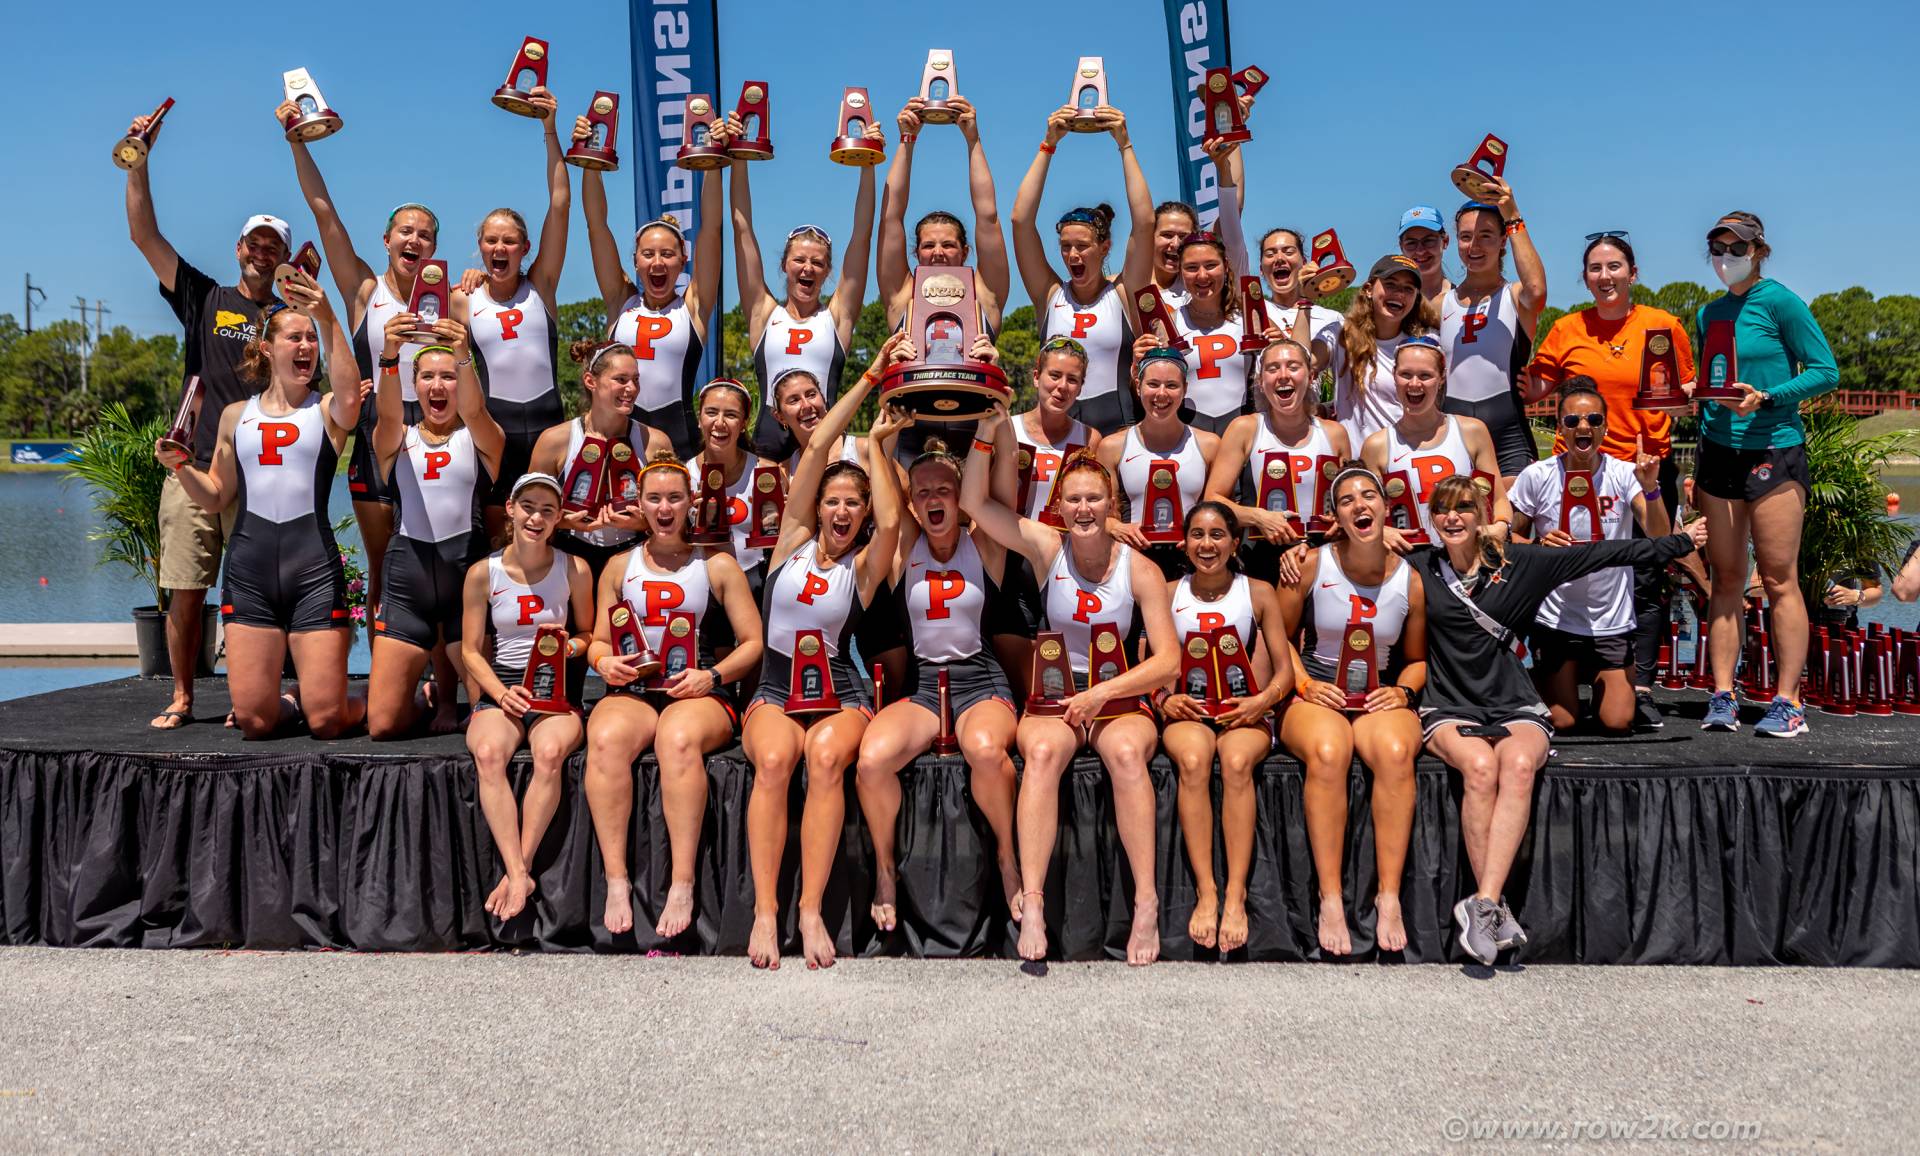 The Princeton women’s Varsity Four won a gold medal at the NCAA Rowing Championships